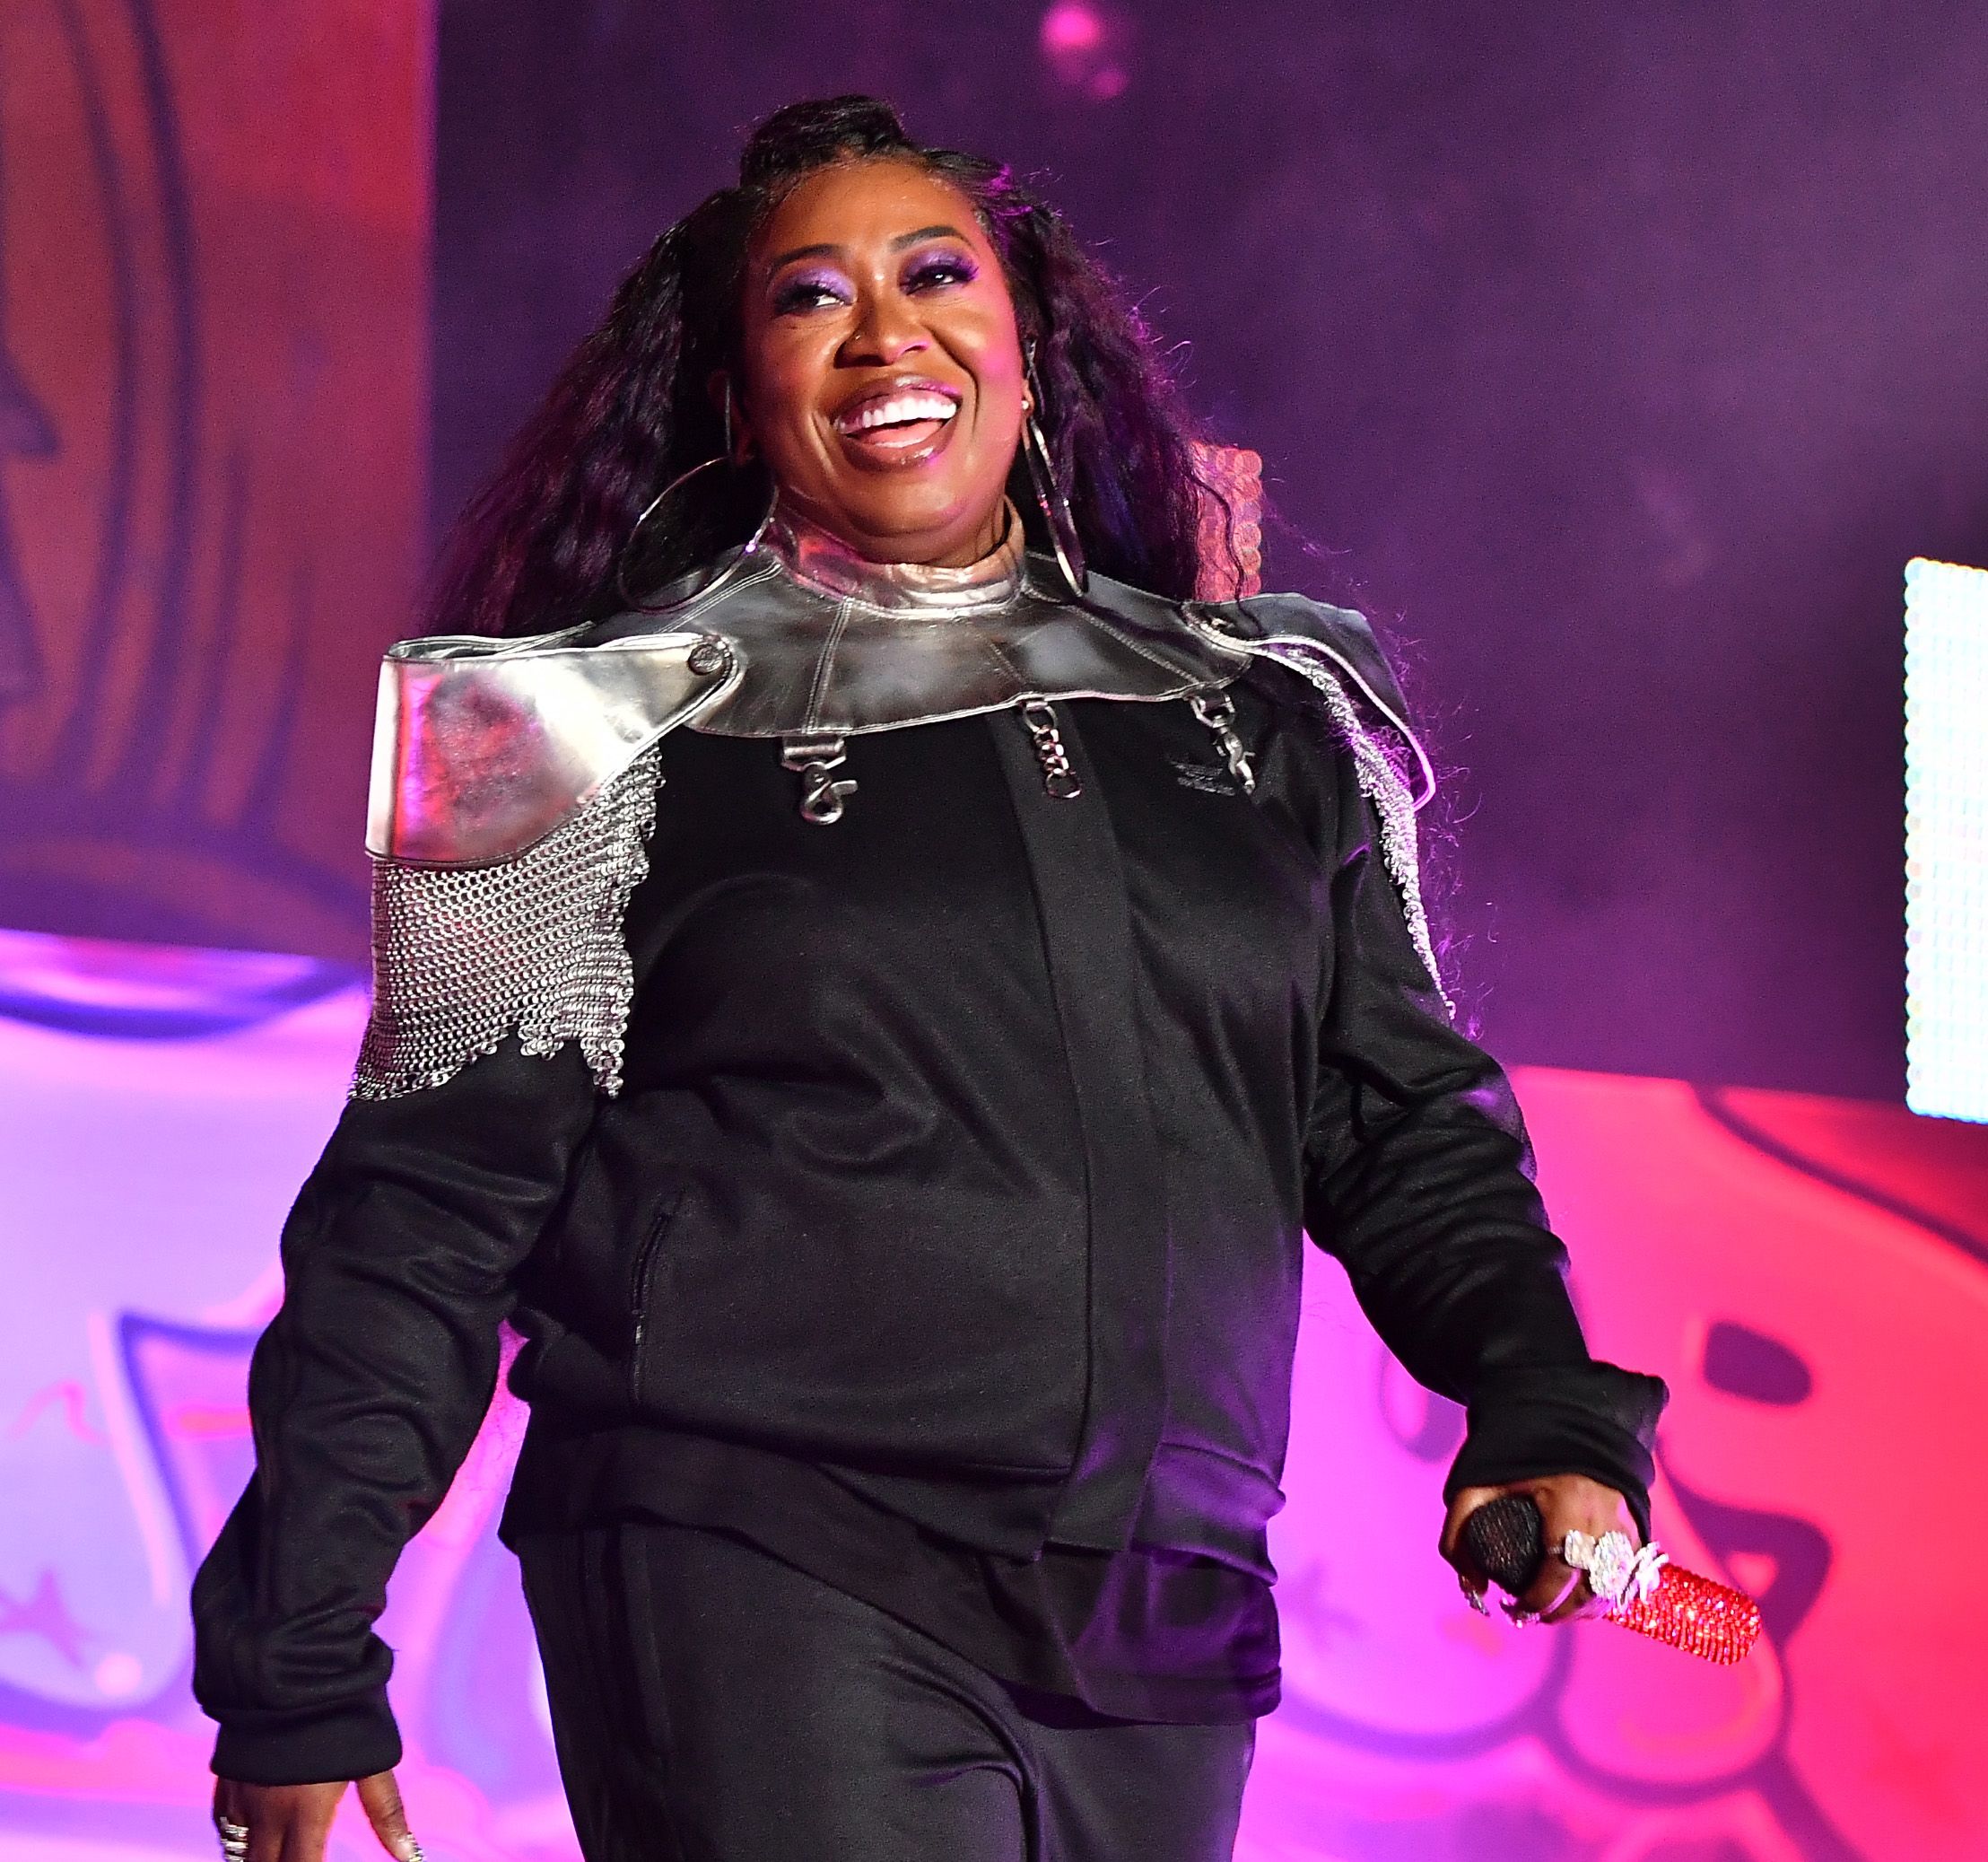 Here Are Our 10+ Most Iconic Fashion Moments Of Missy Elliott